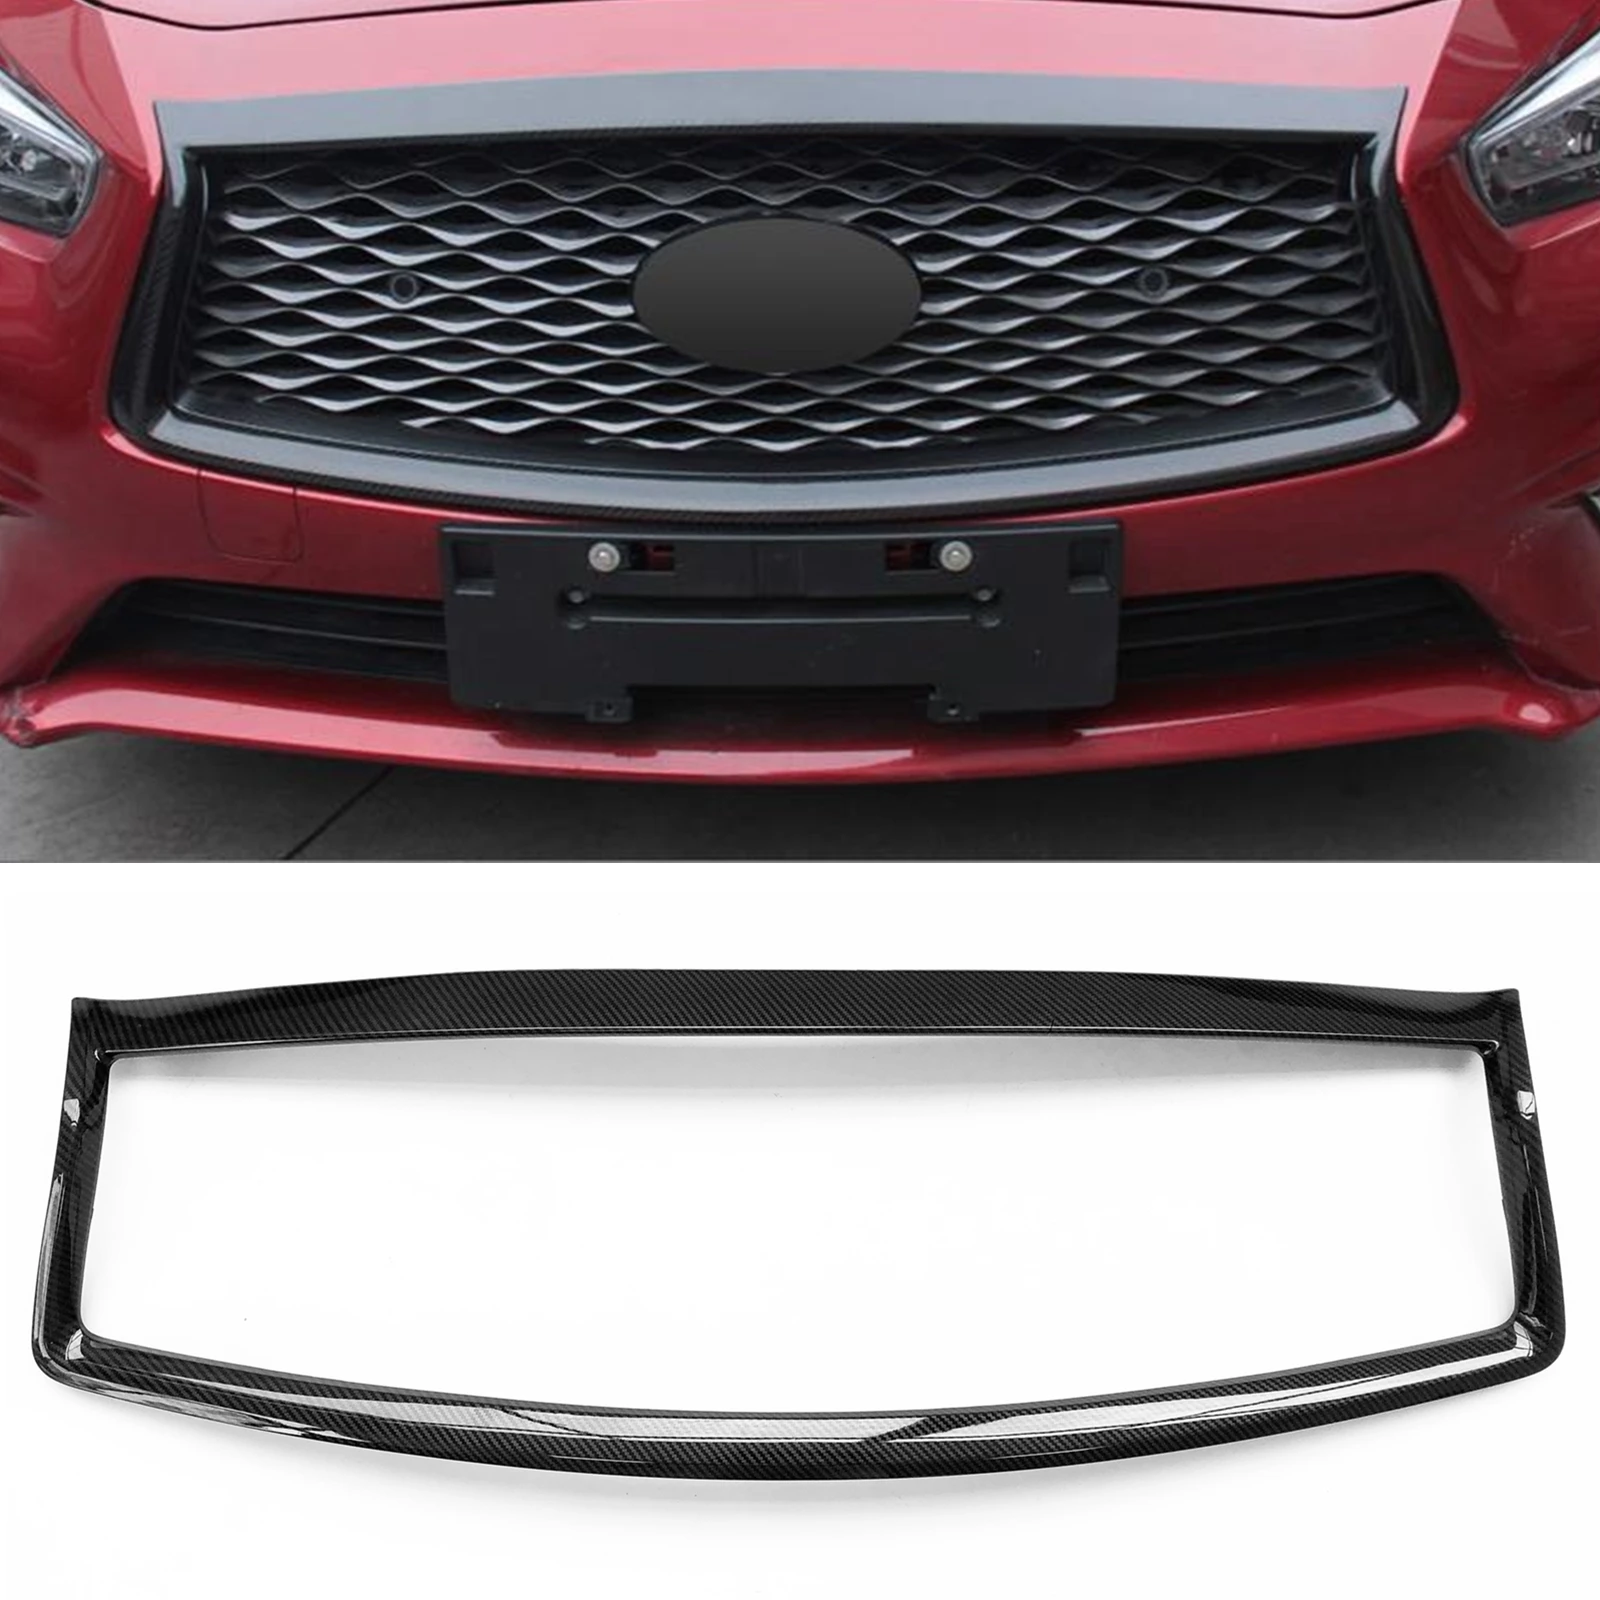 

For Infiniti Q50 2014-2017 Front Grille Grill Frame Strip Carbon Fiber Look Car Bumper Hood Cover Overlay Bezel Trim Replacement